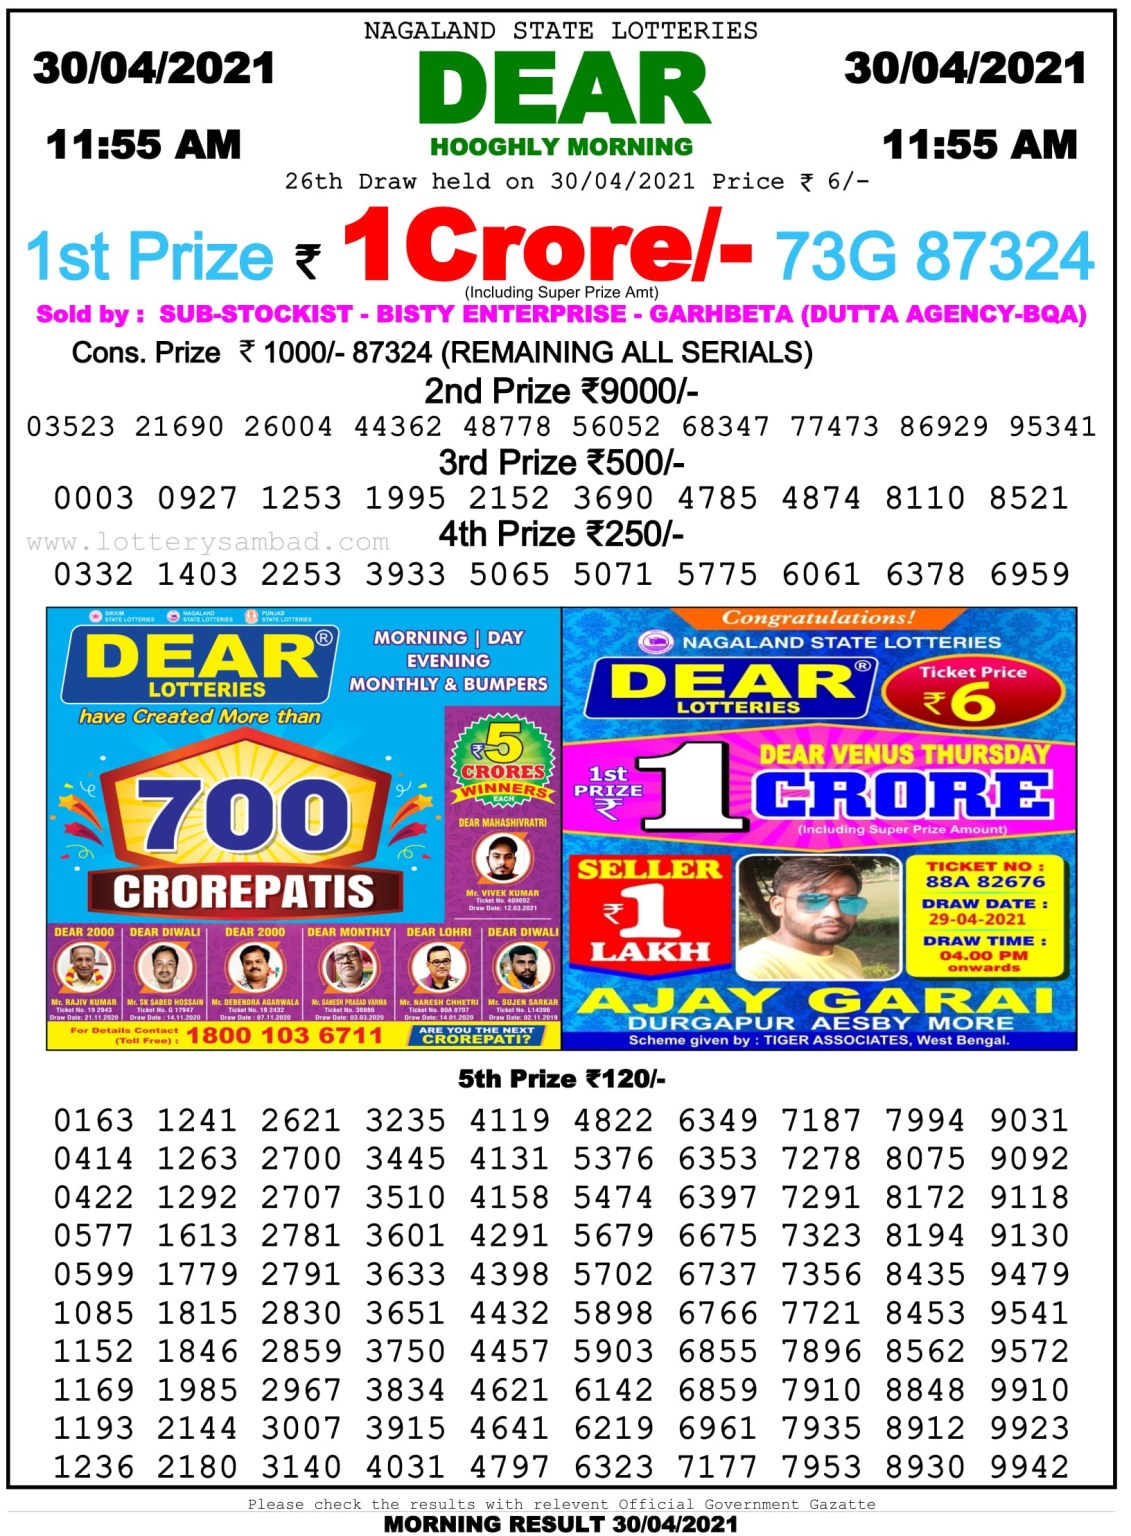 Dear Daily Lottery Result 11.55AM 30 Apr 2021